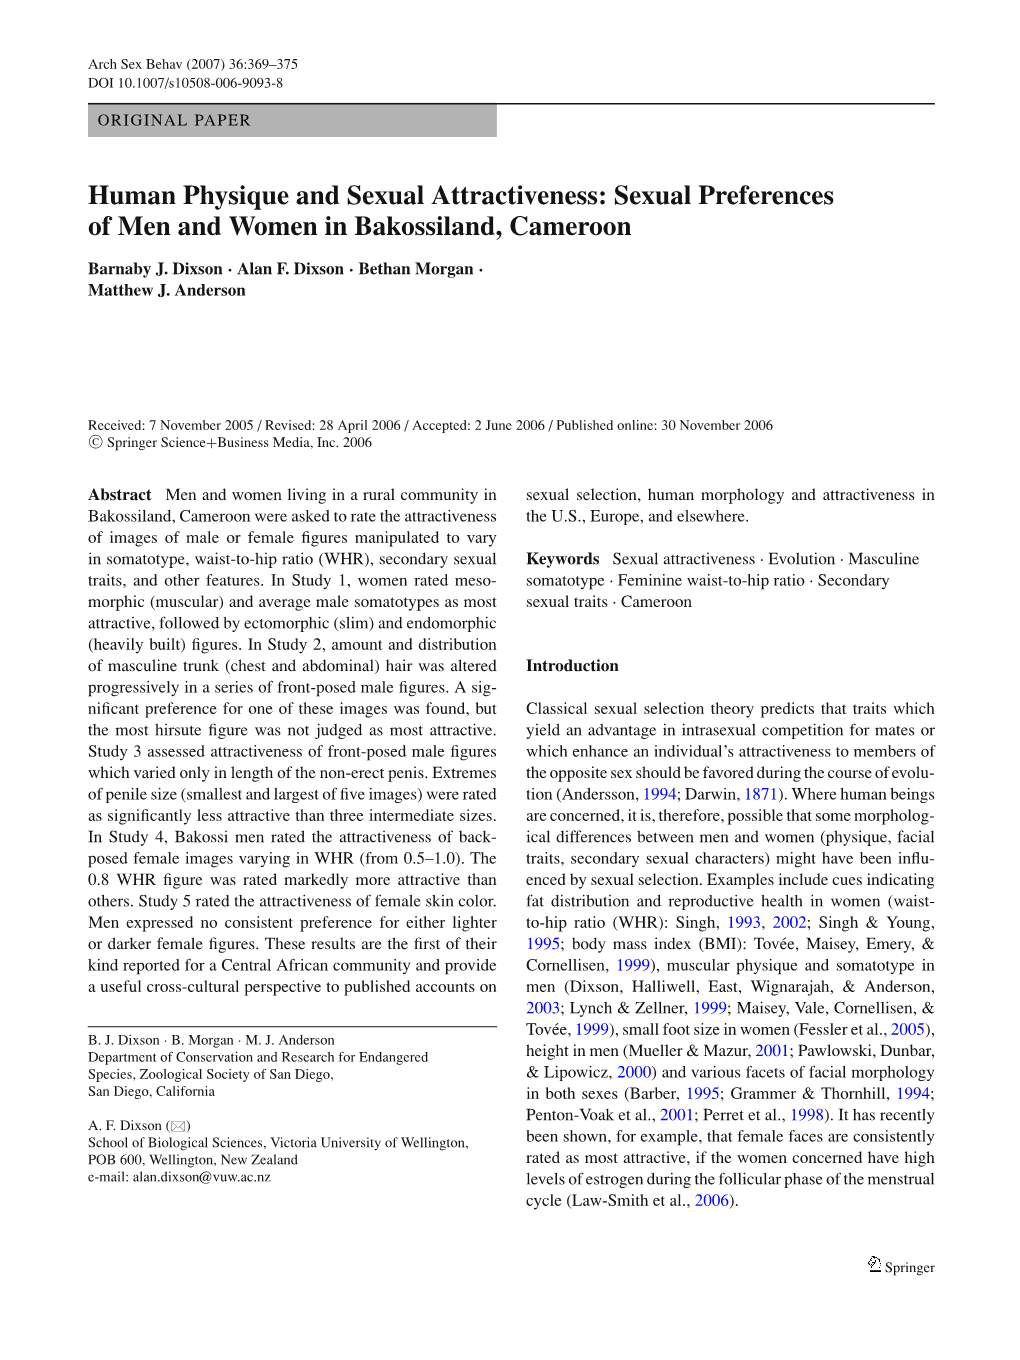 Human Physique and Sexual Attractiveness: Sexual Preferences of Men and Women in Bakossiland, Cameroon